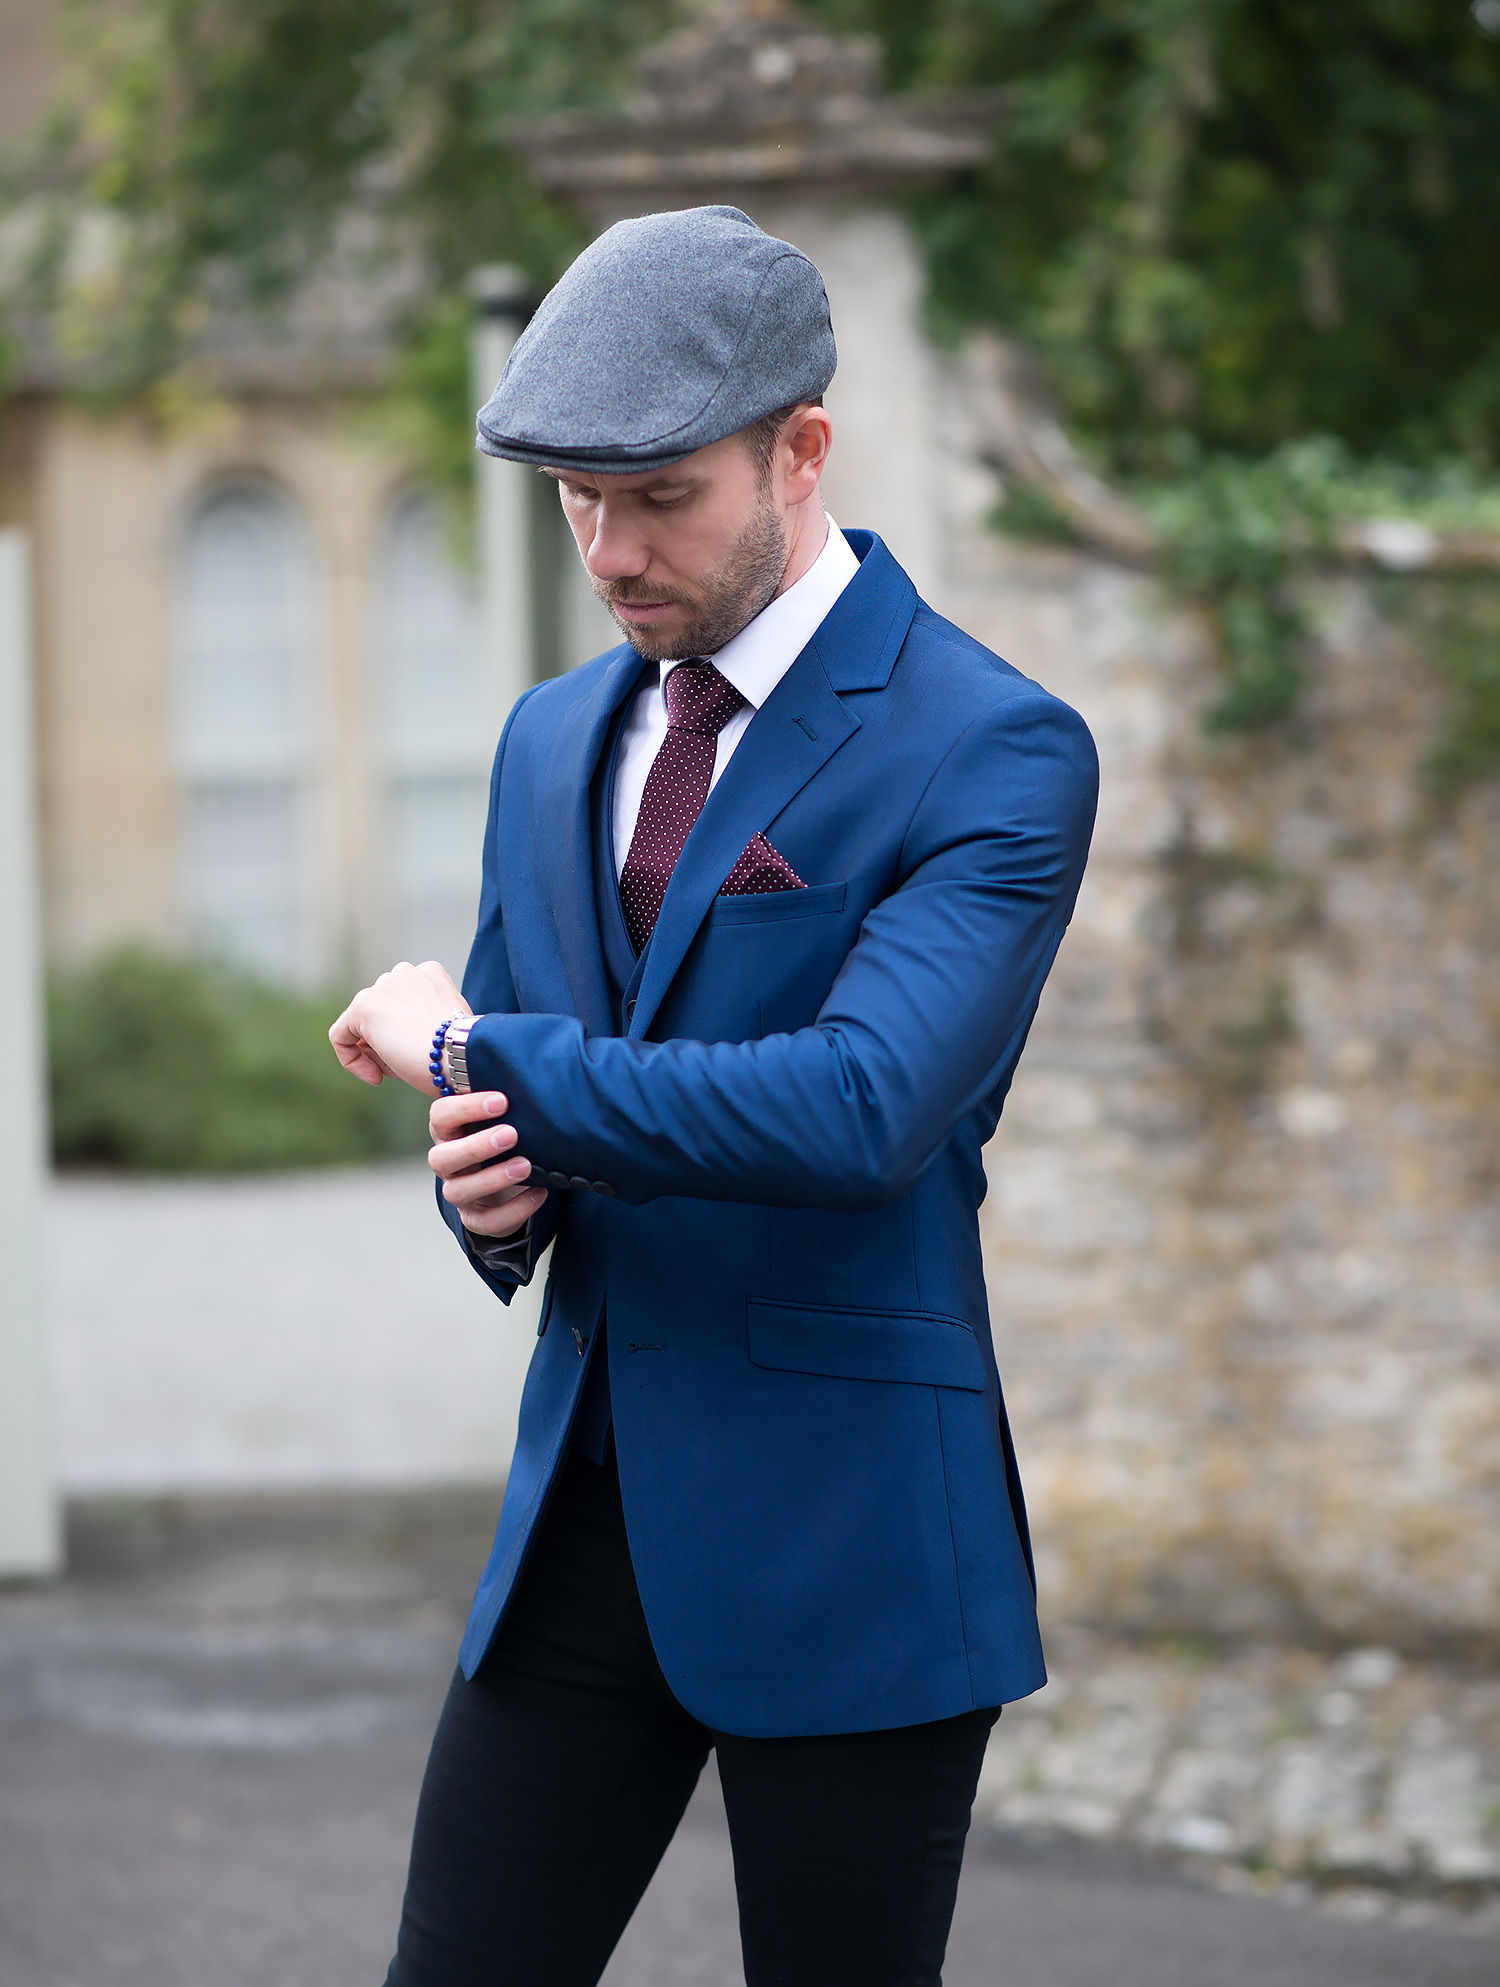 Blue Suit With Black Skinny Jeans Outfit - Your Average Guy